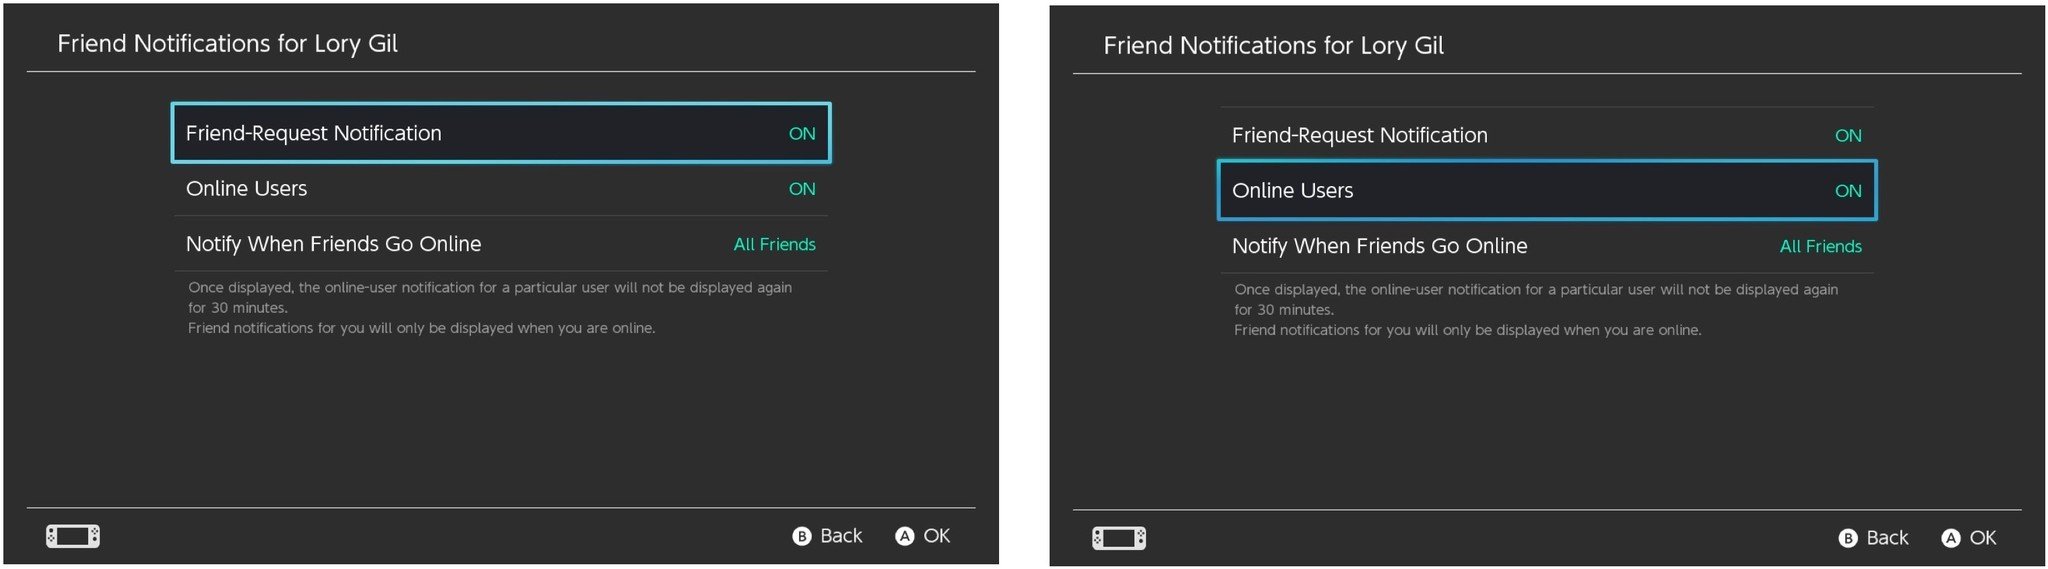 Select Friend-Request Notification, then select Online User